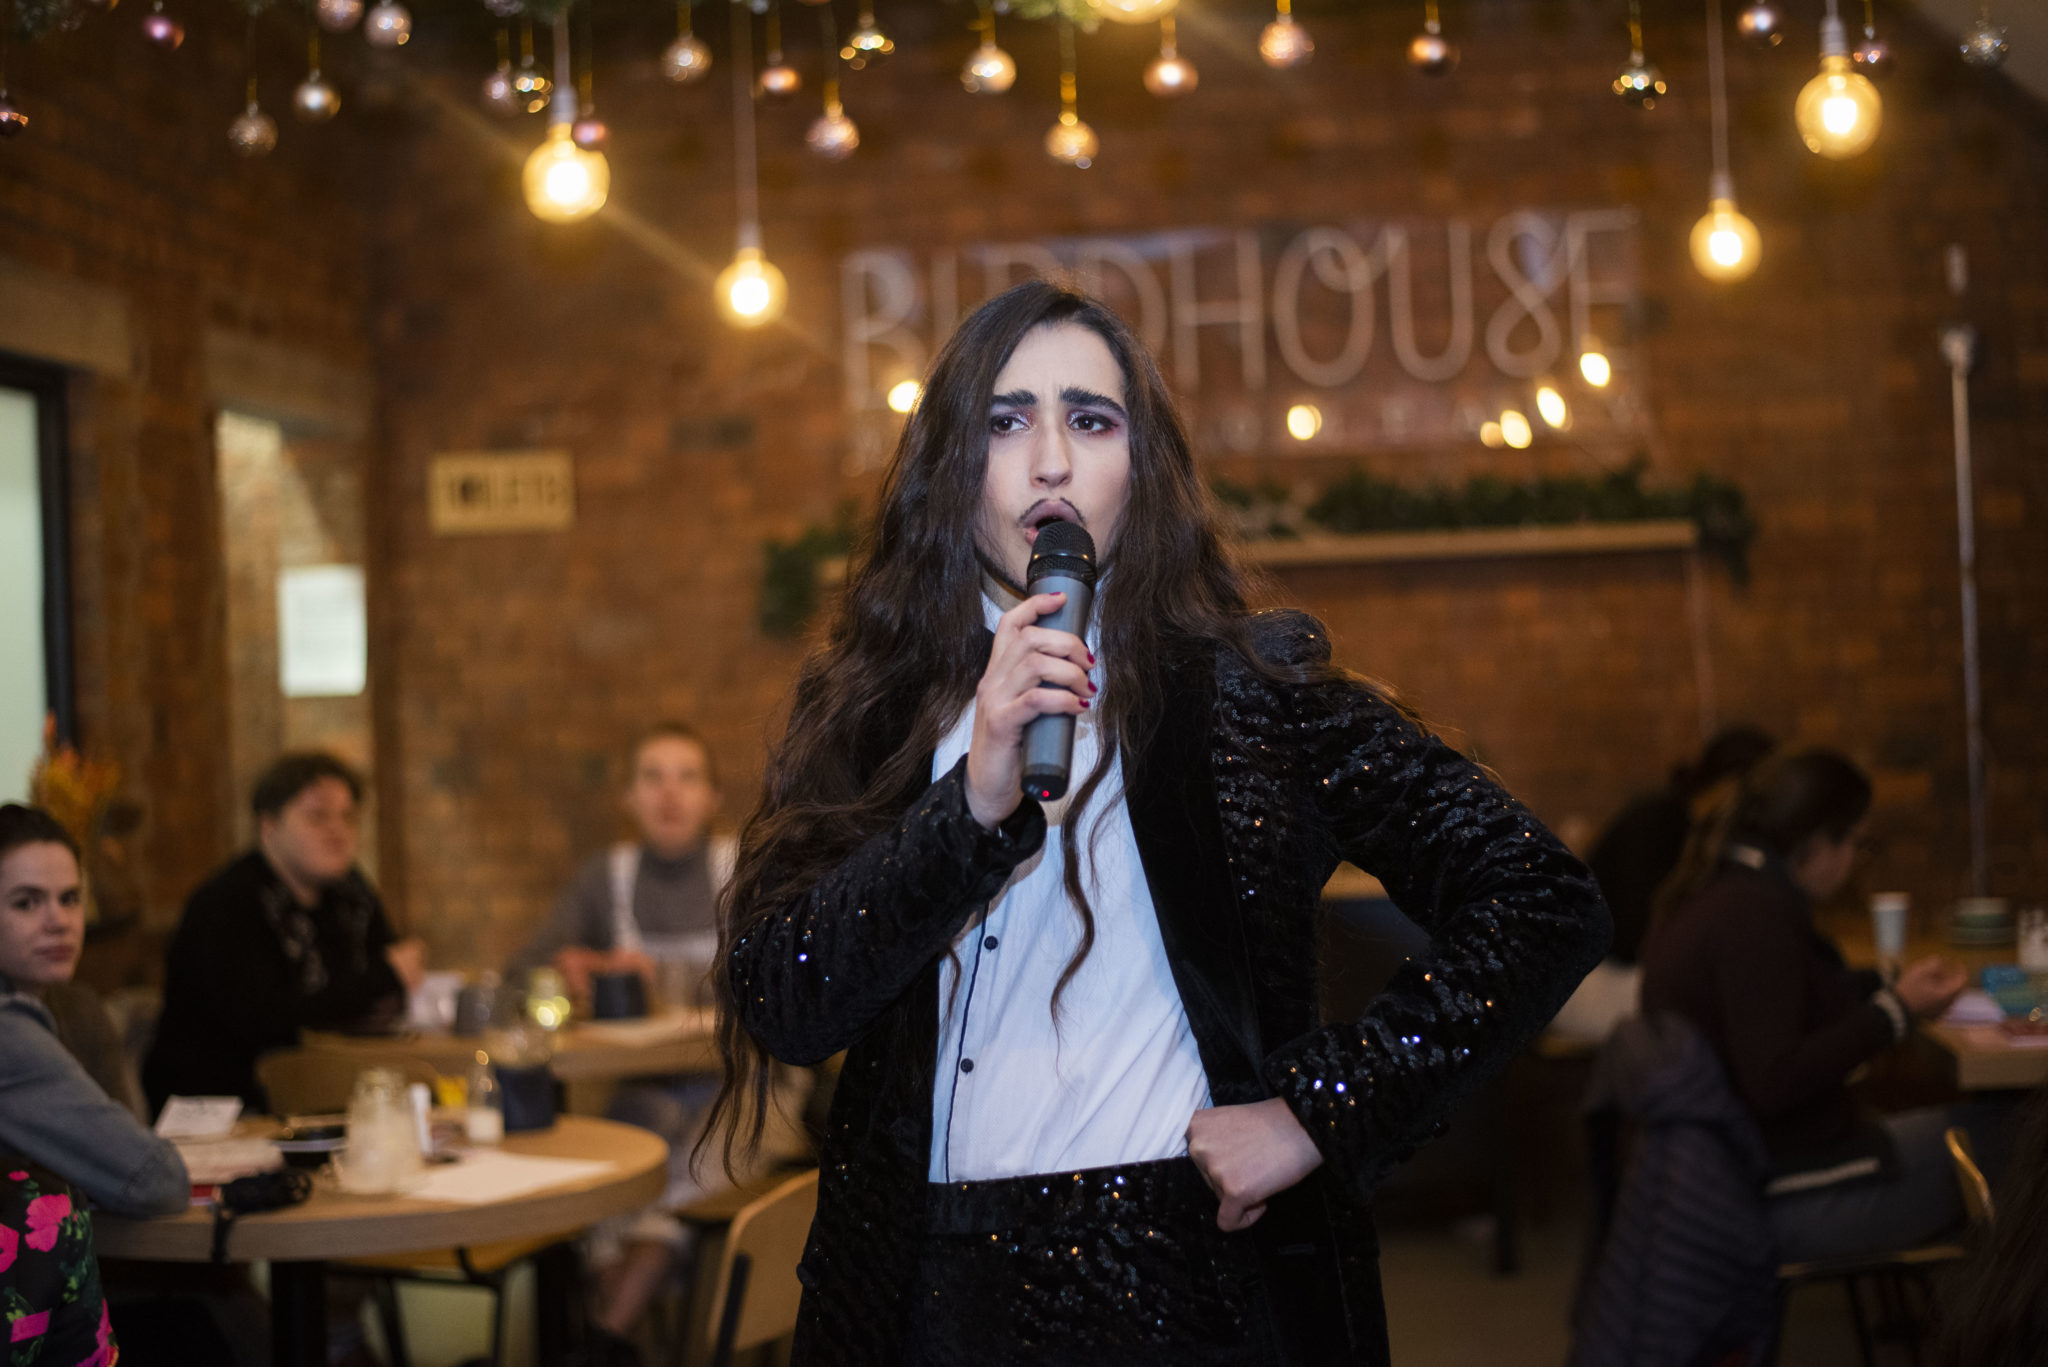 a slim, olive skinned drag king with brown, waist length hair and dark moustache sings into a microphone. He is wearing a sequin black suit with white shirt and bow tie, and smouldering eye shadow. He stands in a cafe with exposed brick walls with warm lighting.